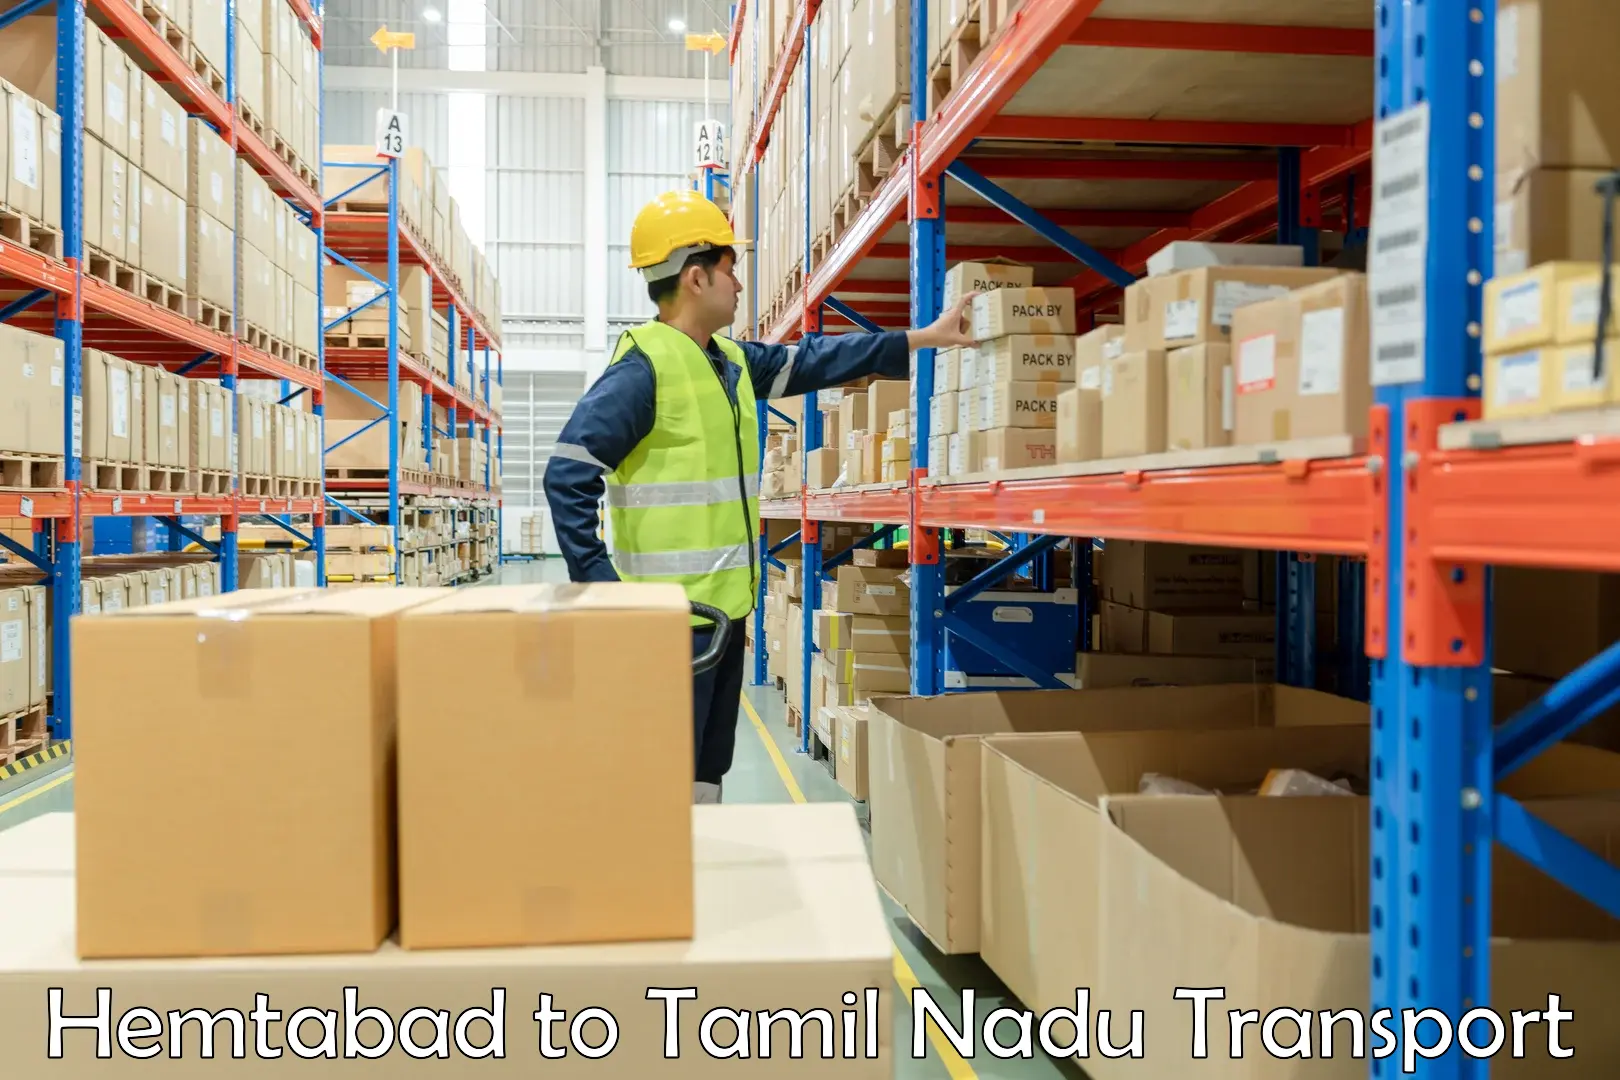 Transport shared services Hemtabad to Gobichettipalayam